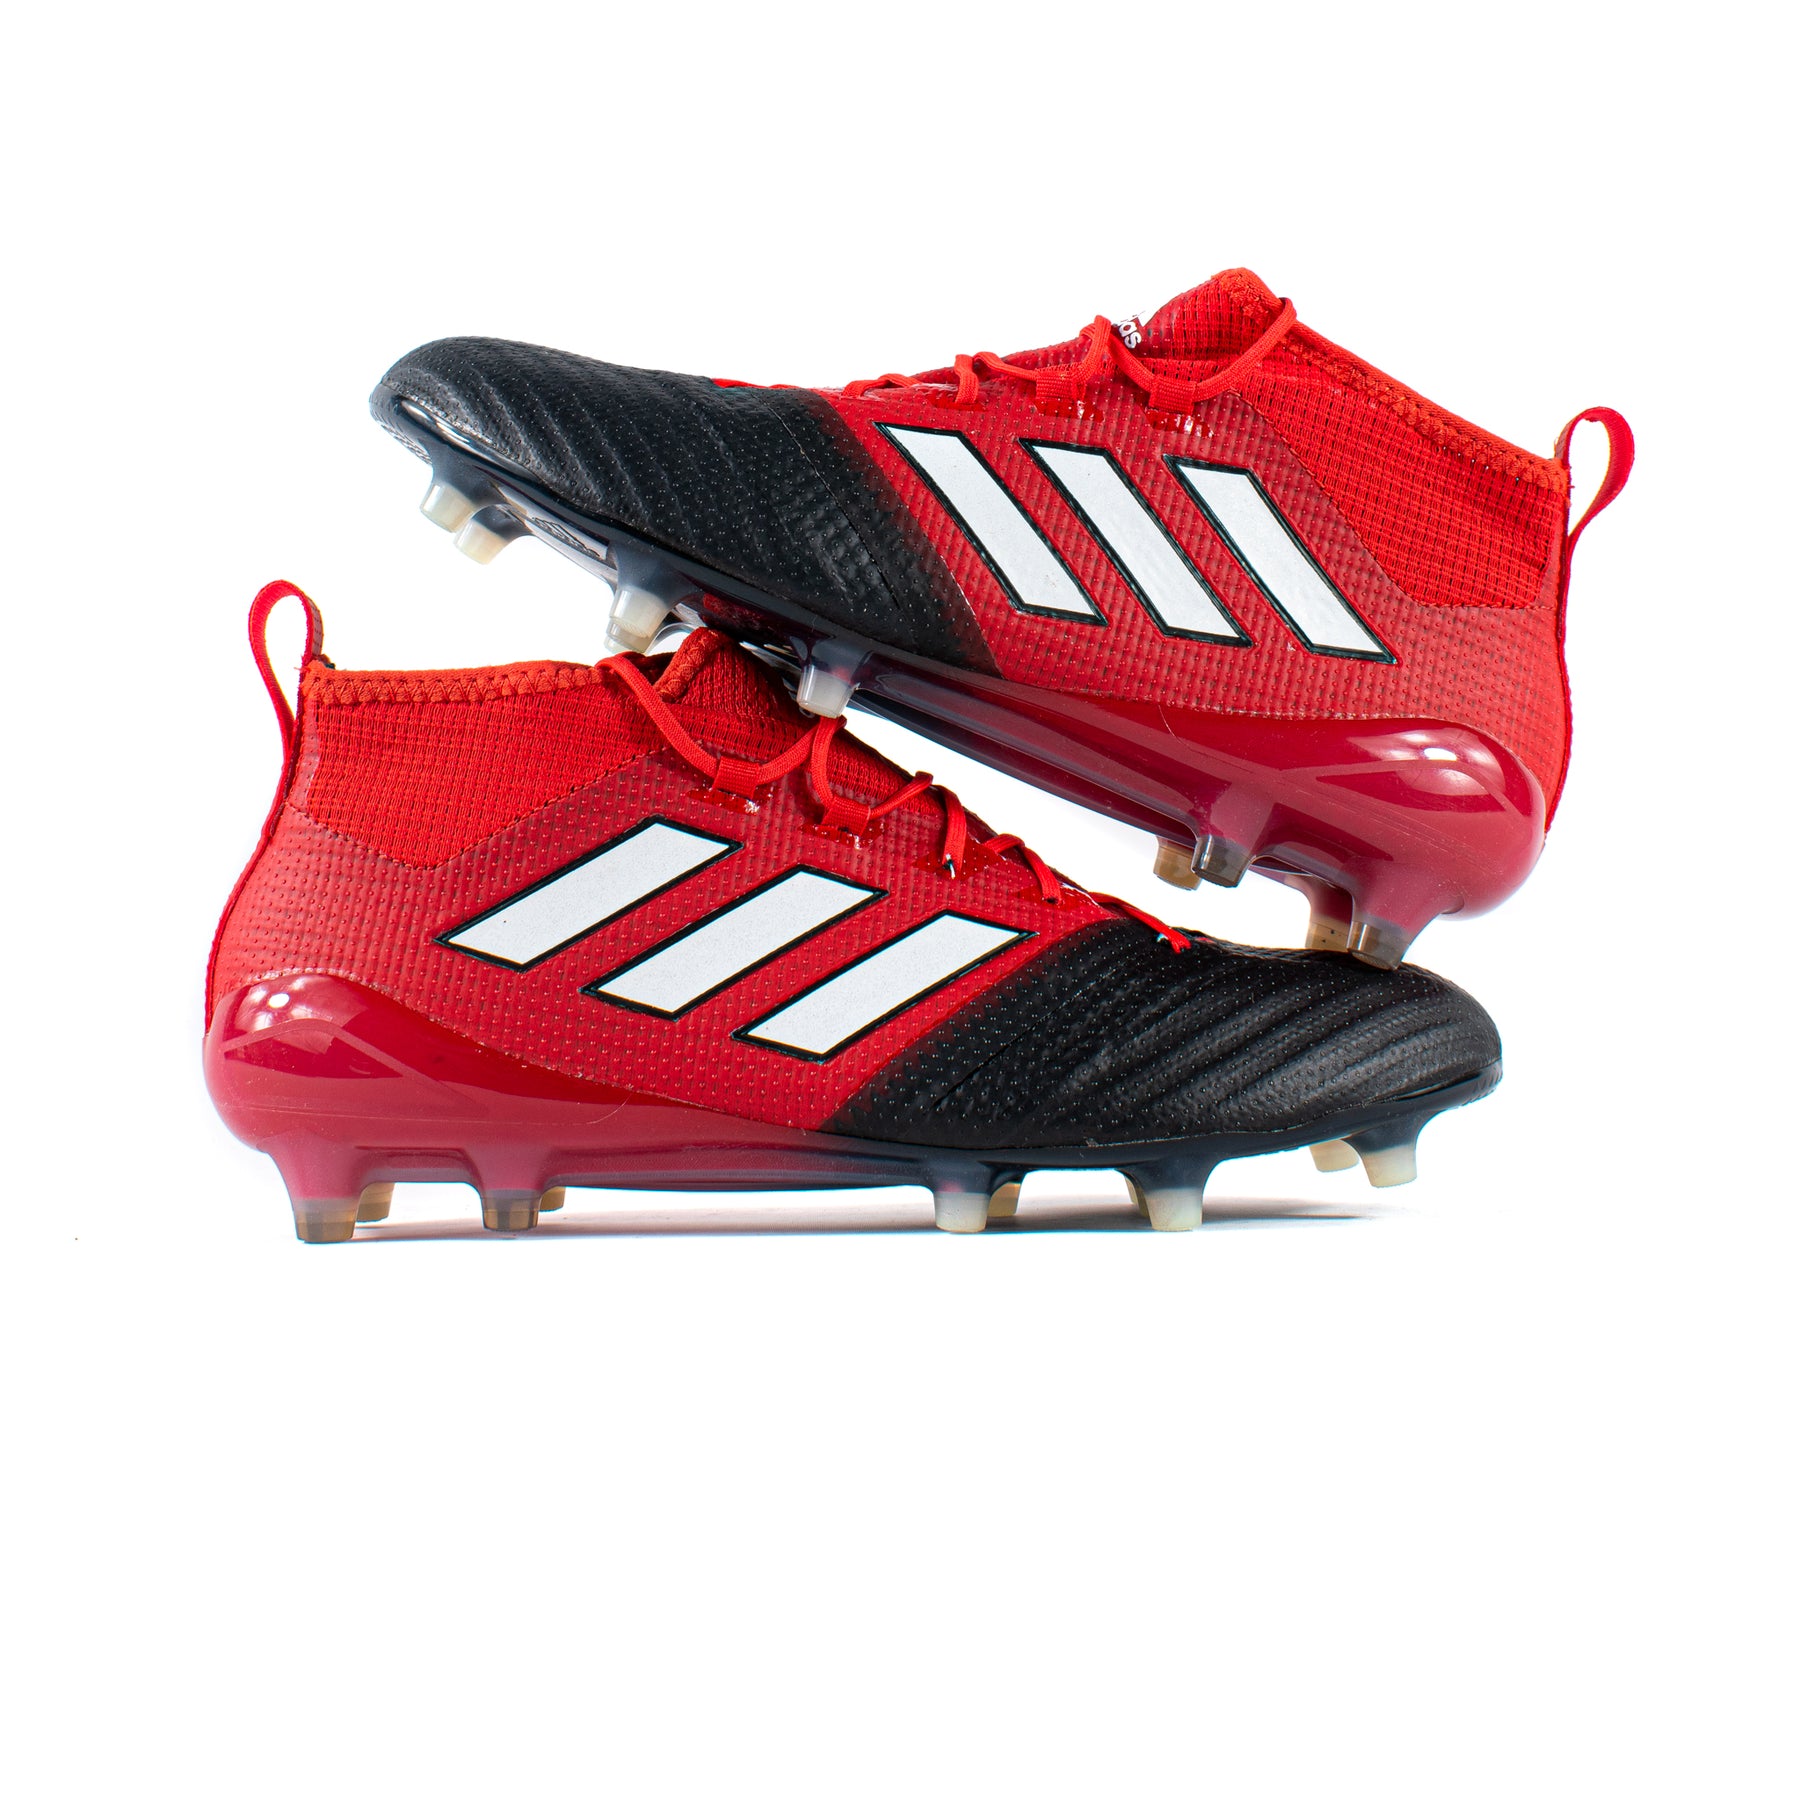 Adidas Ace 17.1 Red FG – Classic Soccer